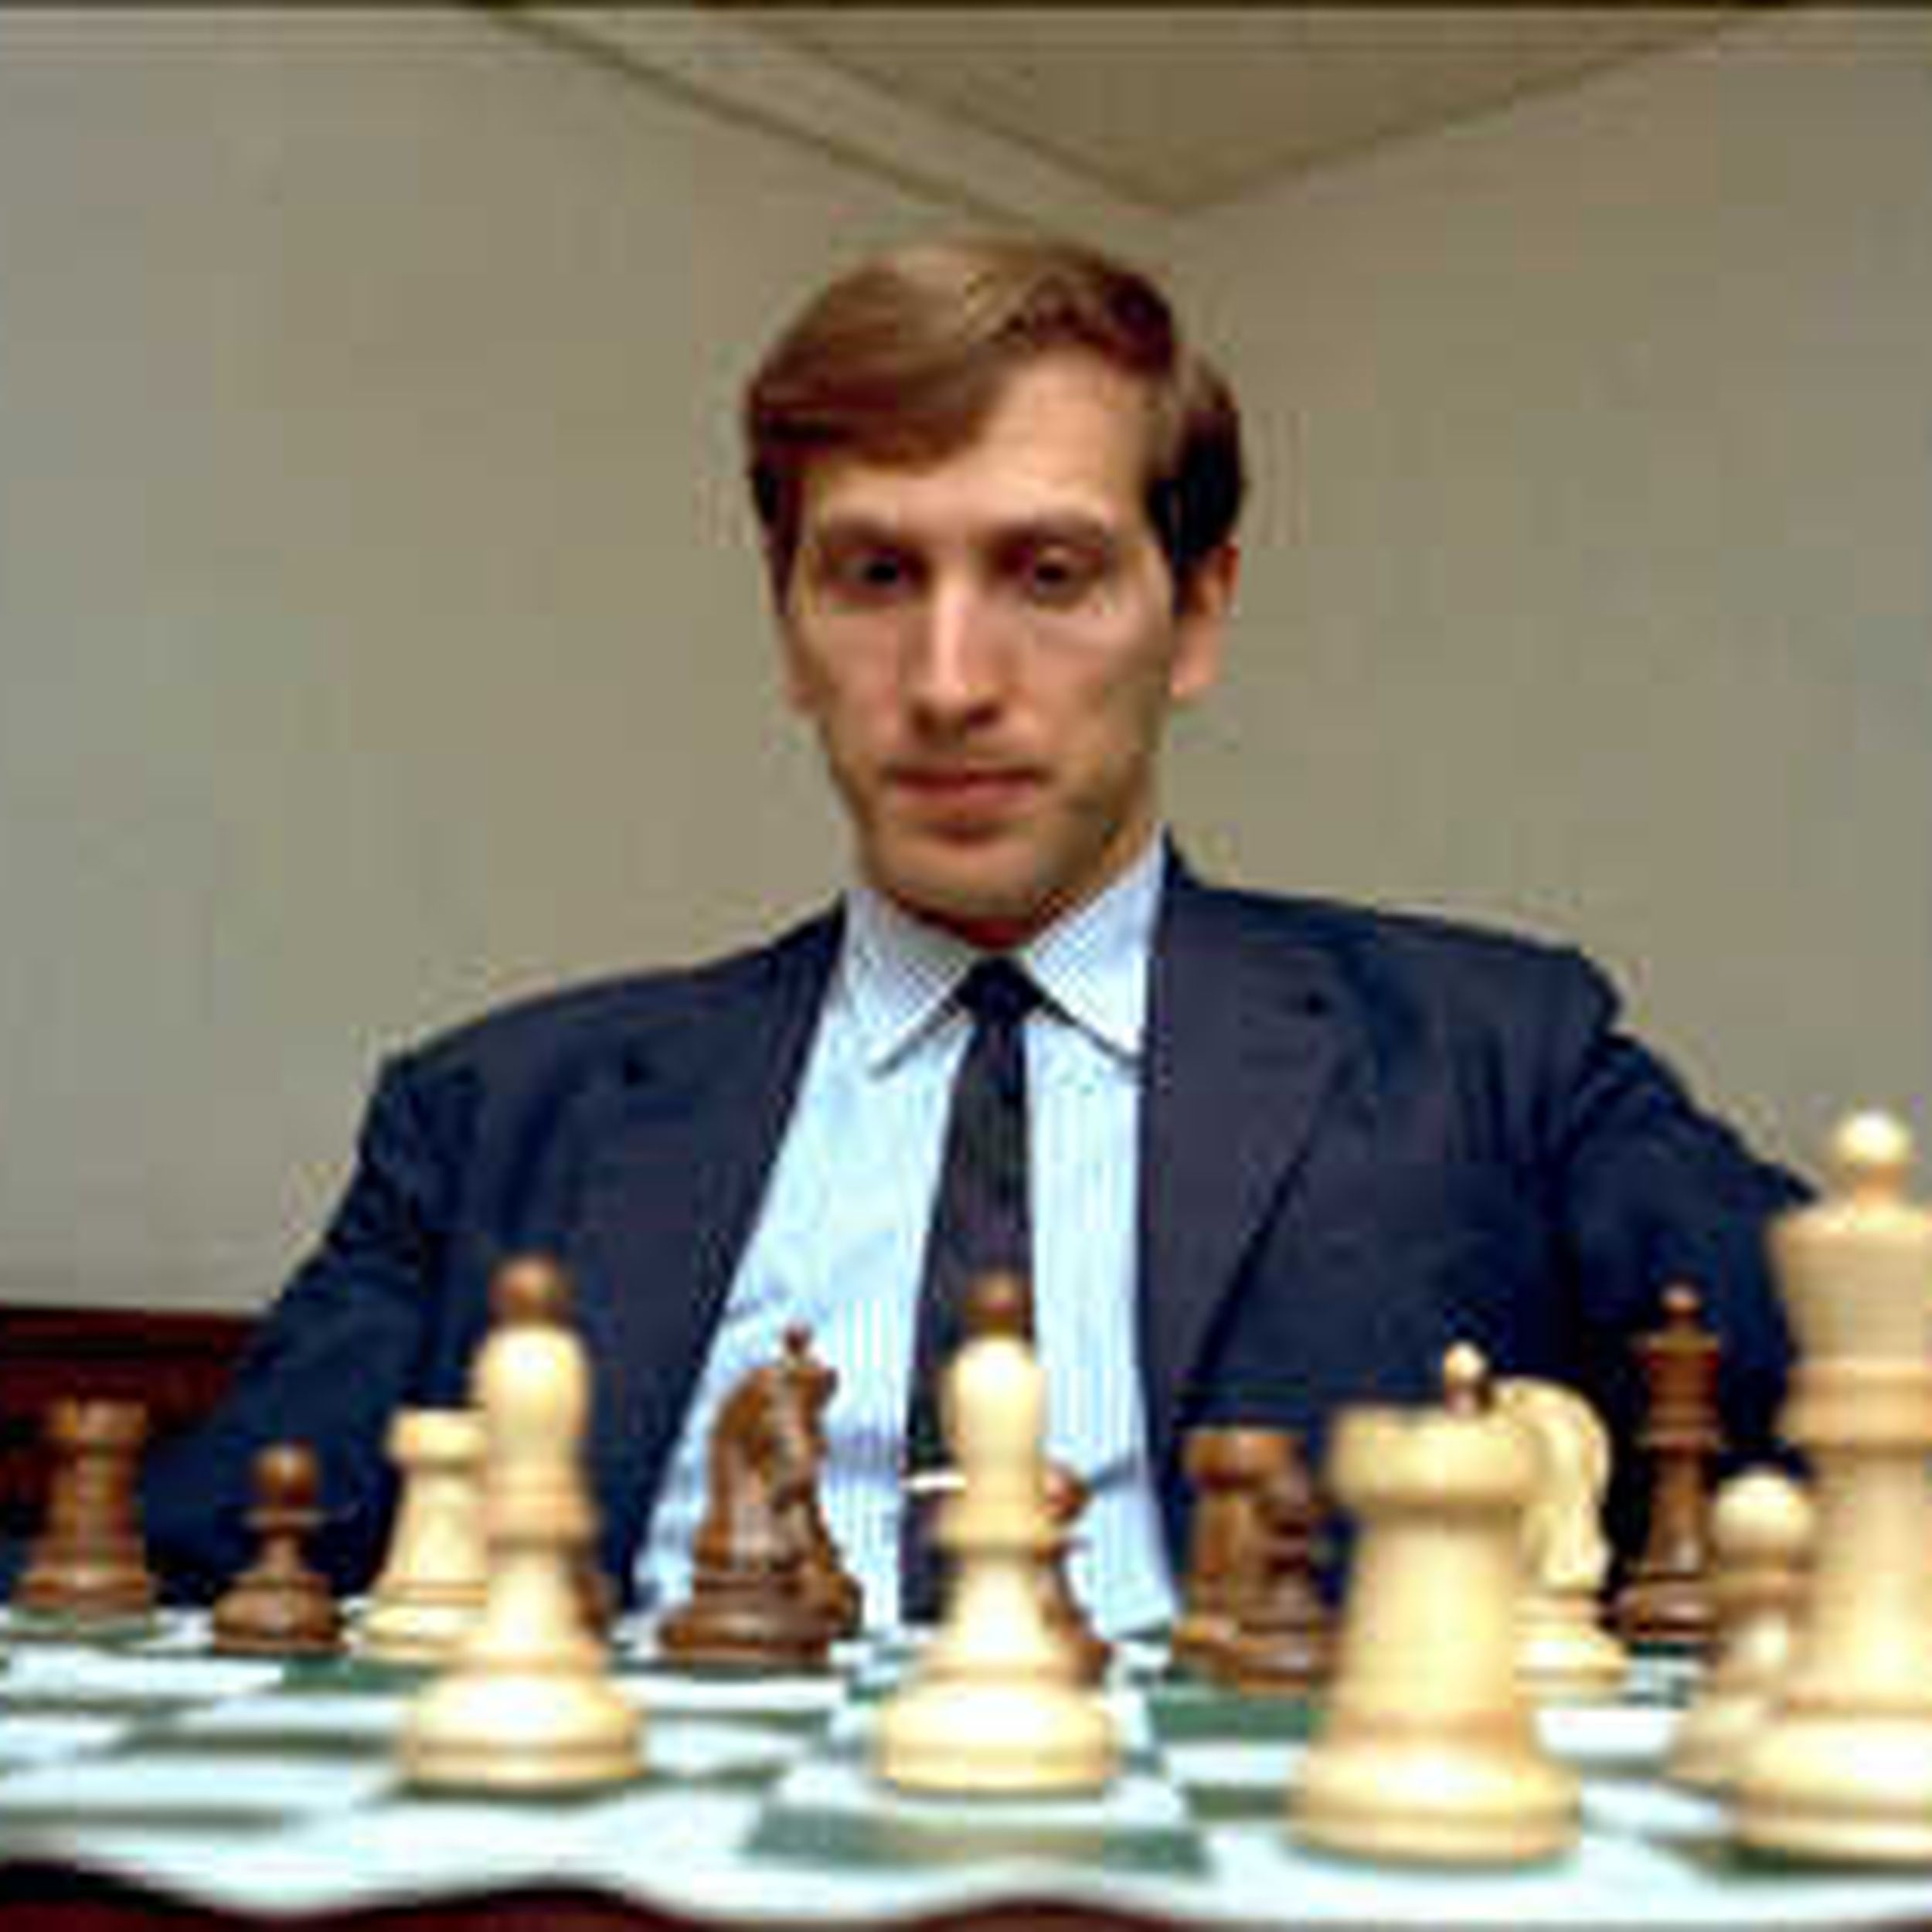 The troubled genius of Bobby Fischer, who died this week 12 years ago